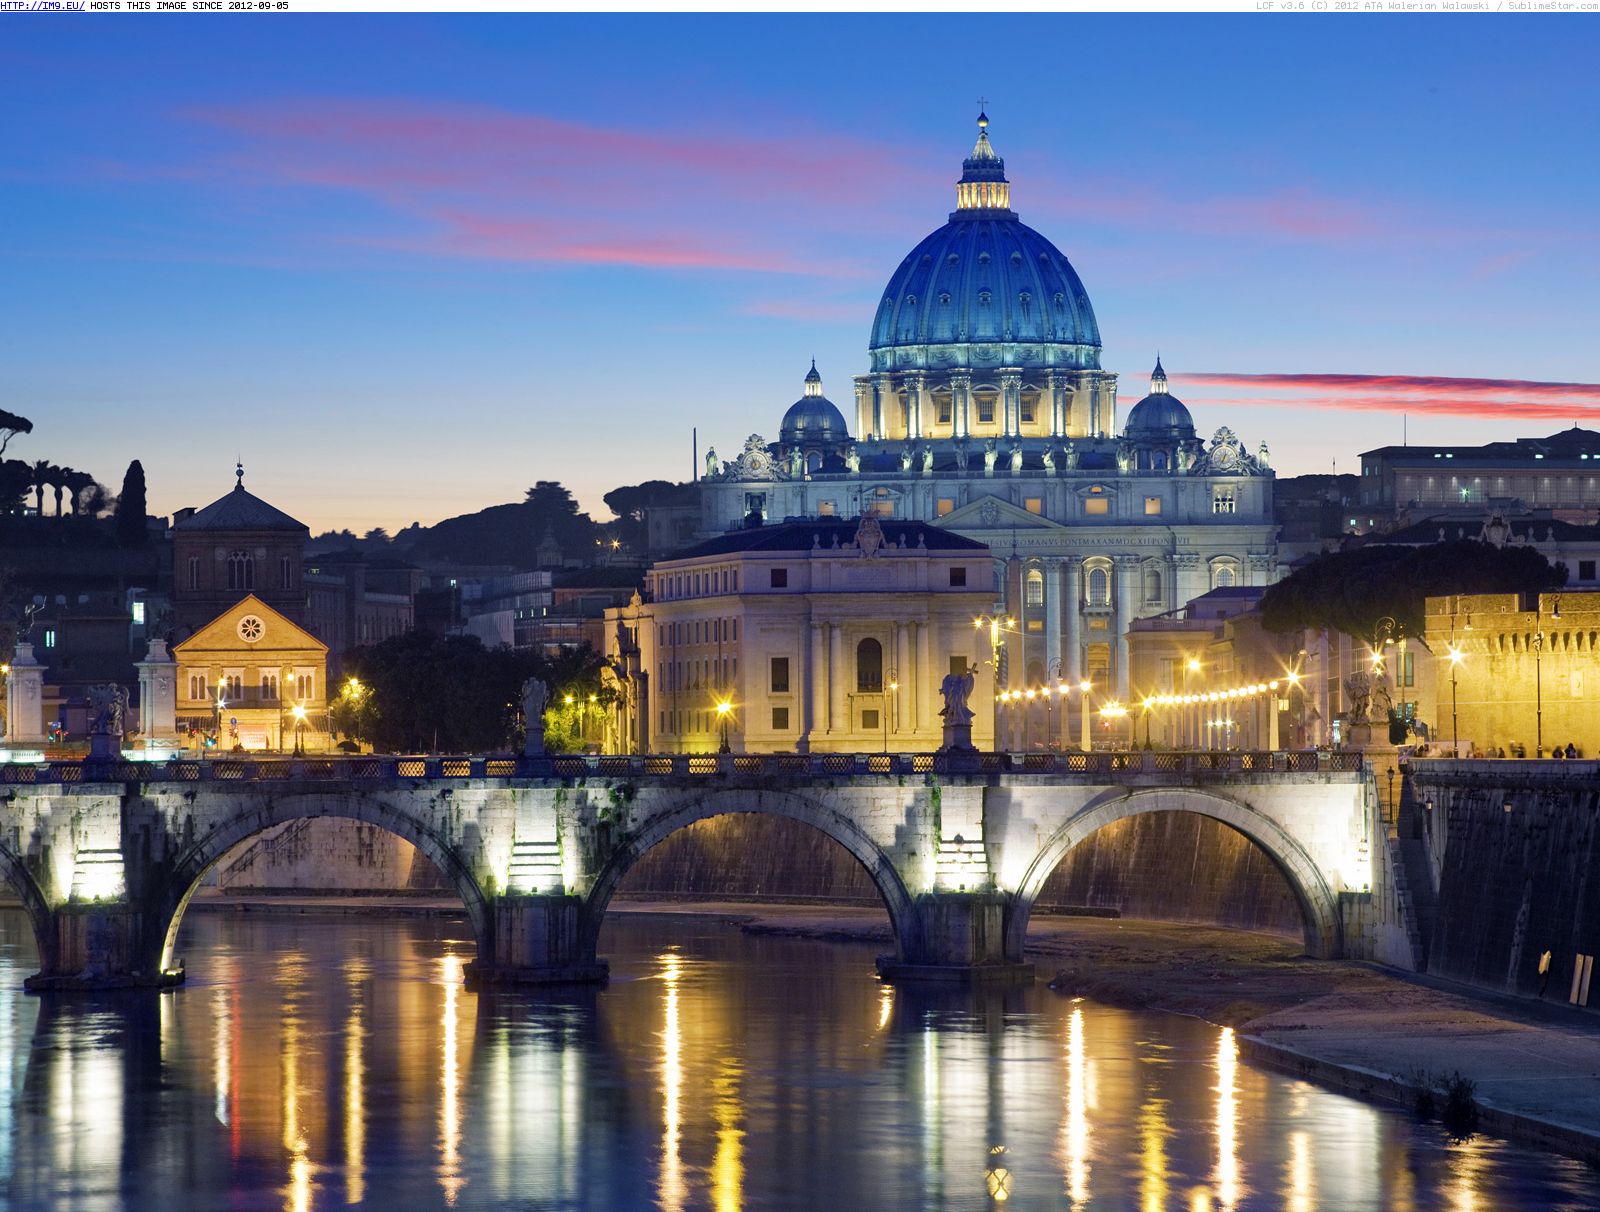 St. Peter's Basilica, Tiber River, Vatican City (in Beautiful photos and wallpapers)